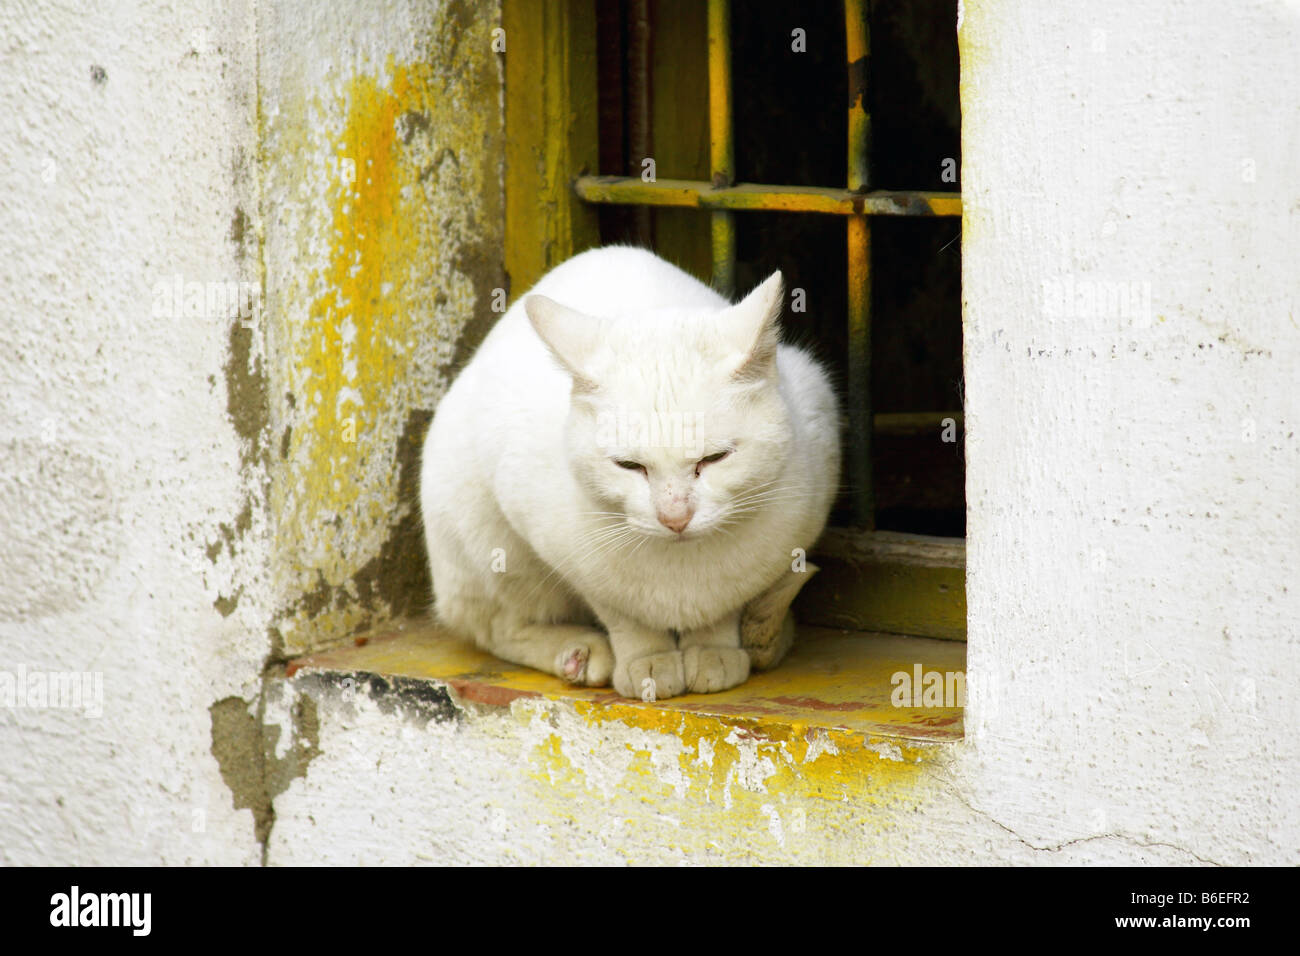 White cat resting in a window Stock Photo